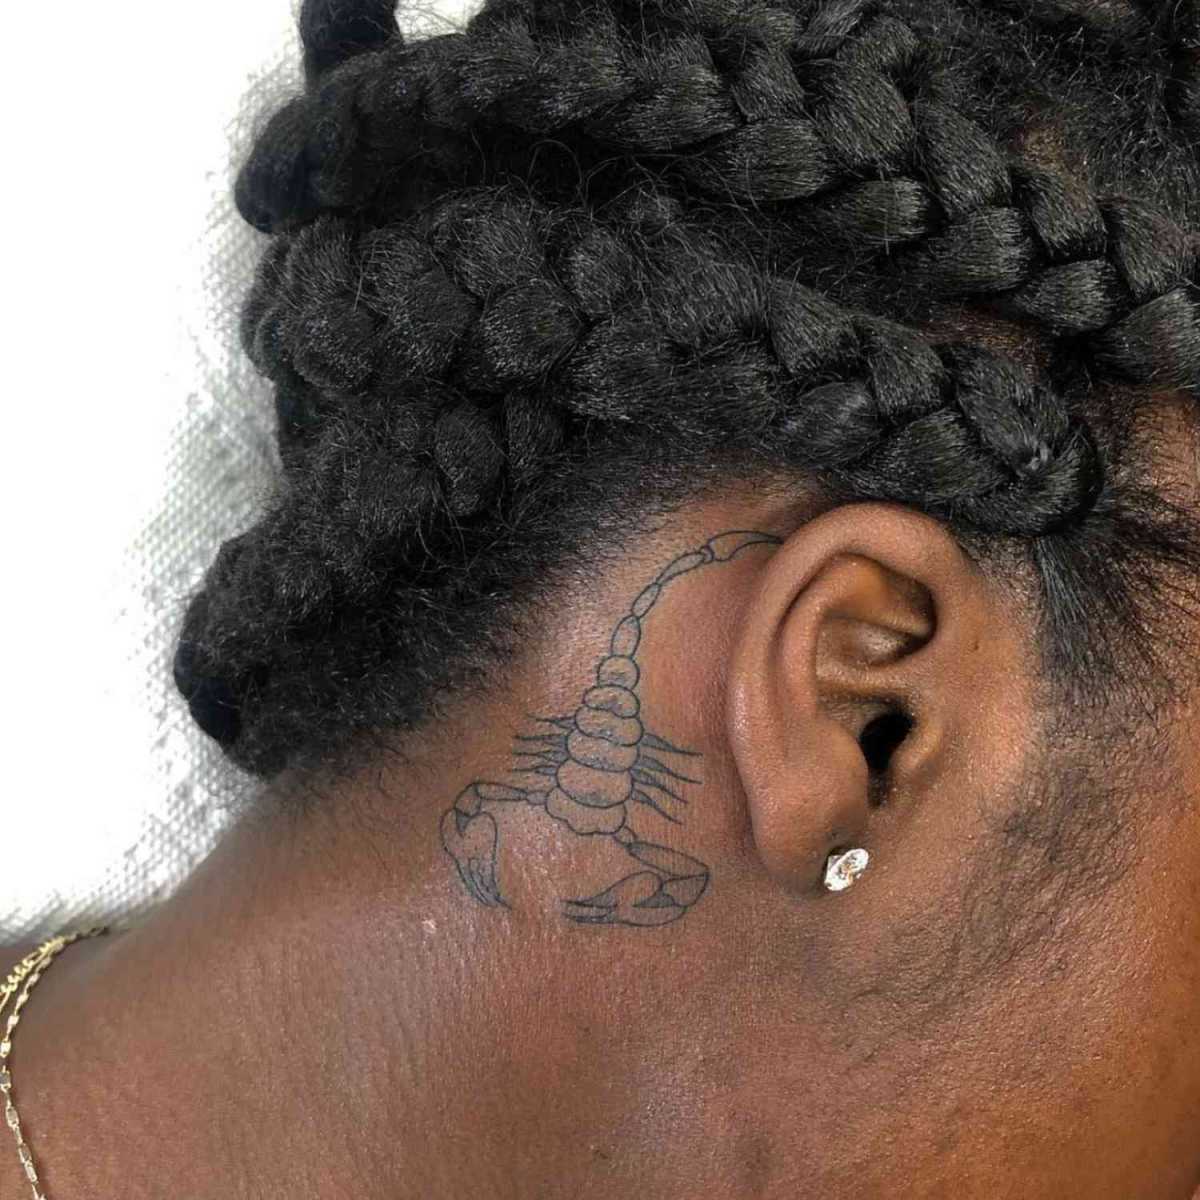 Behind the Ear Tattoo Ideas That Are Creative and Cool